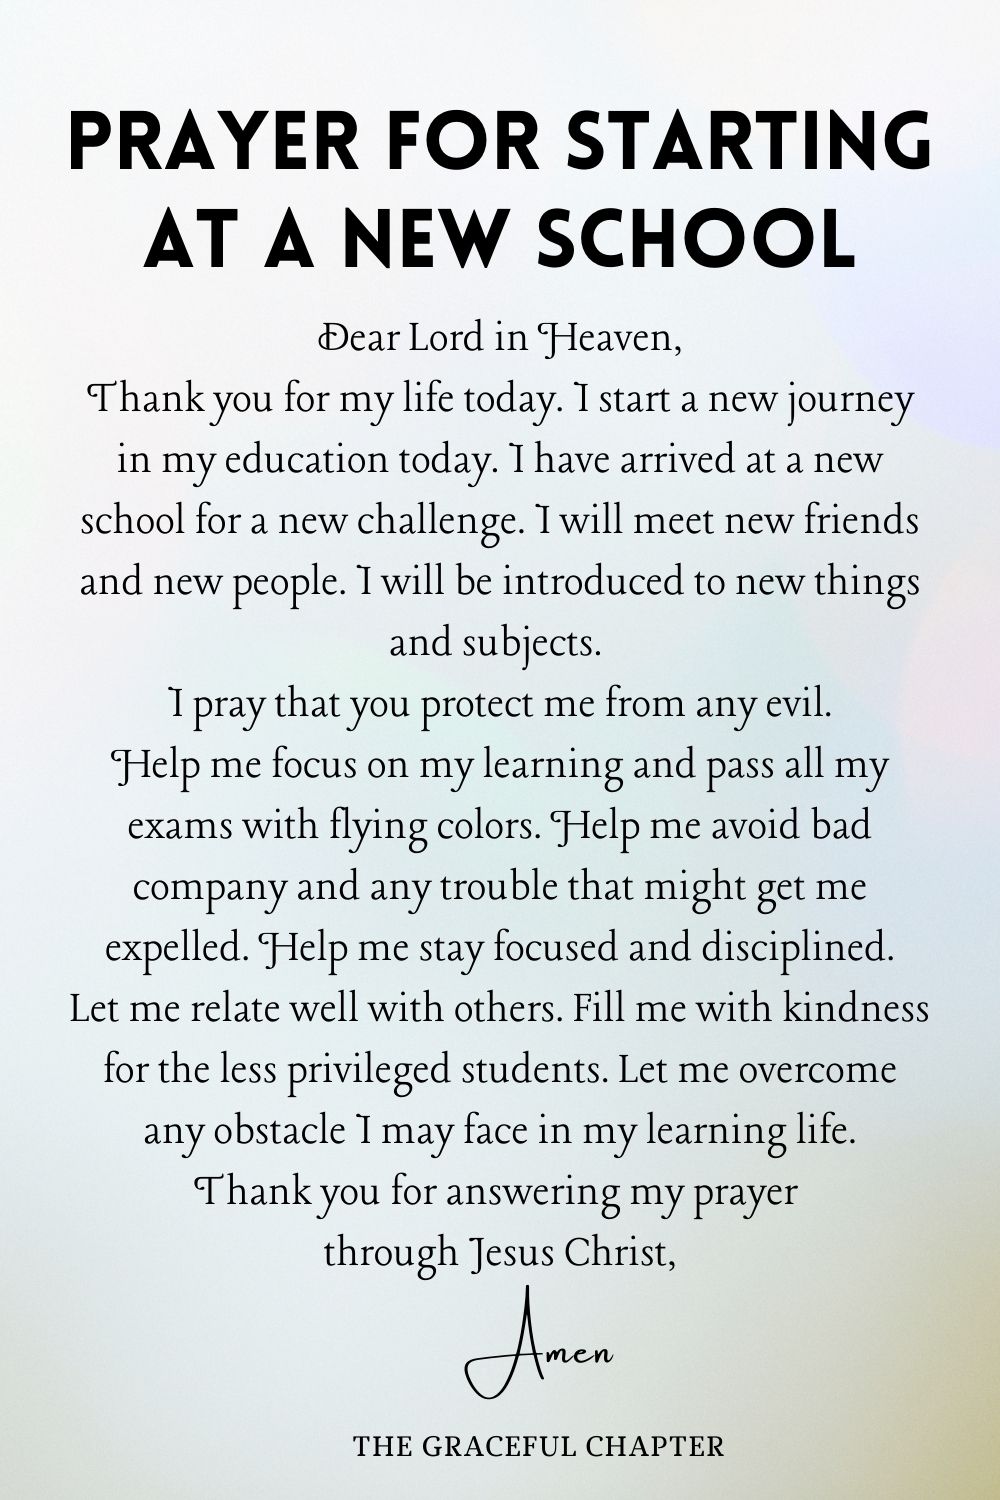 Prayer for starting at a new school